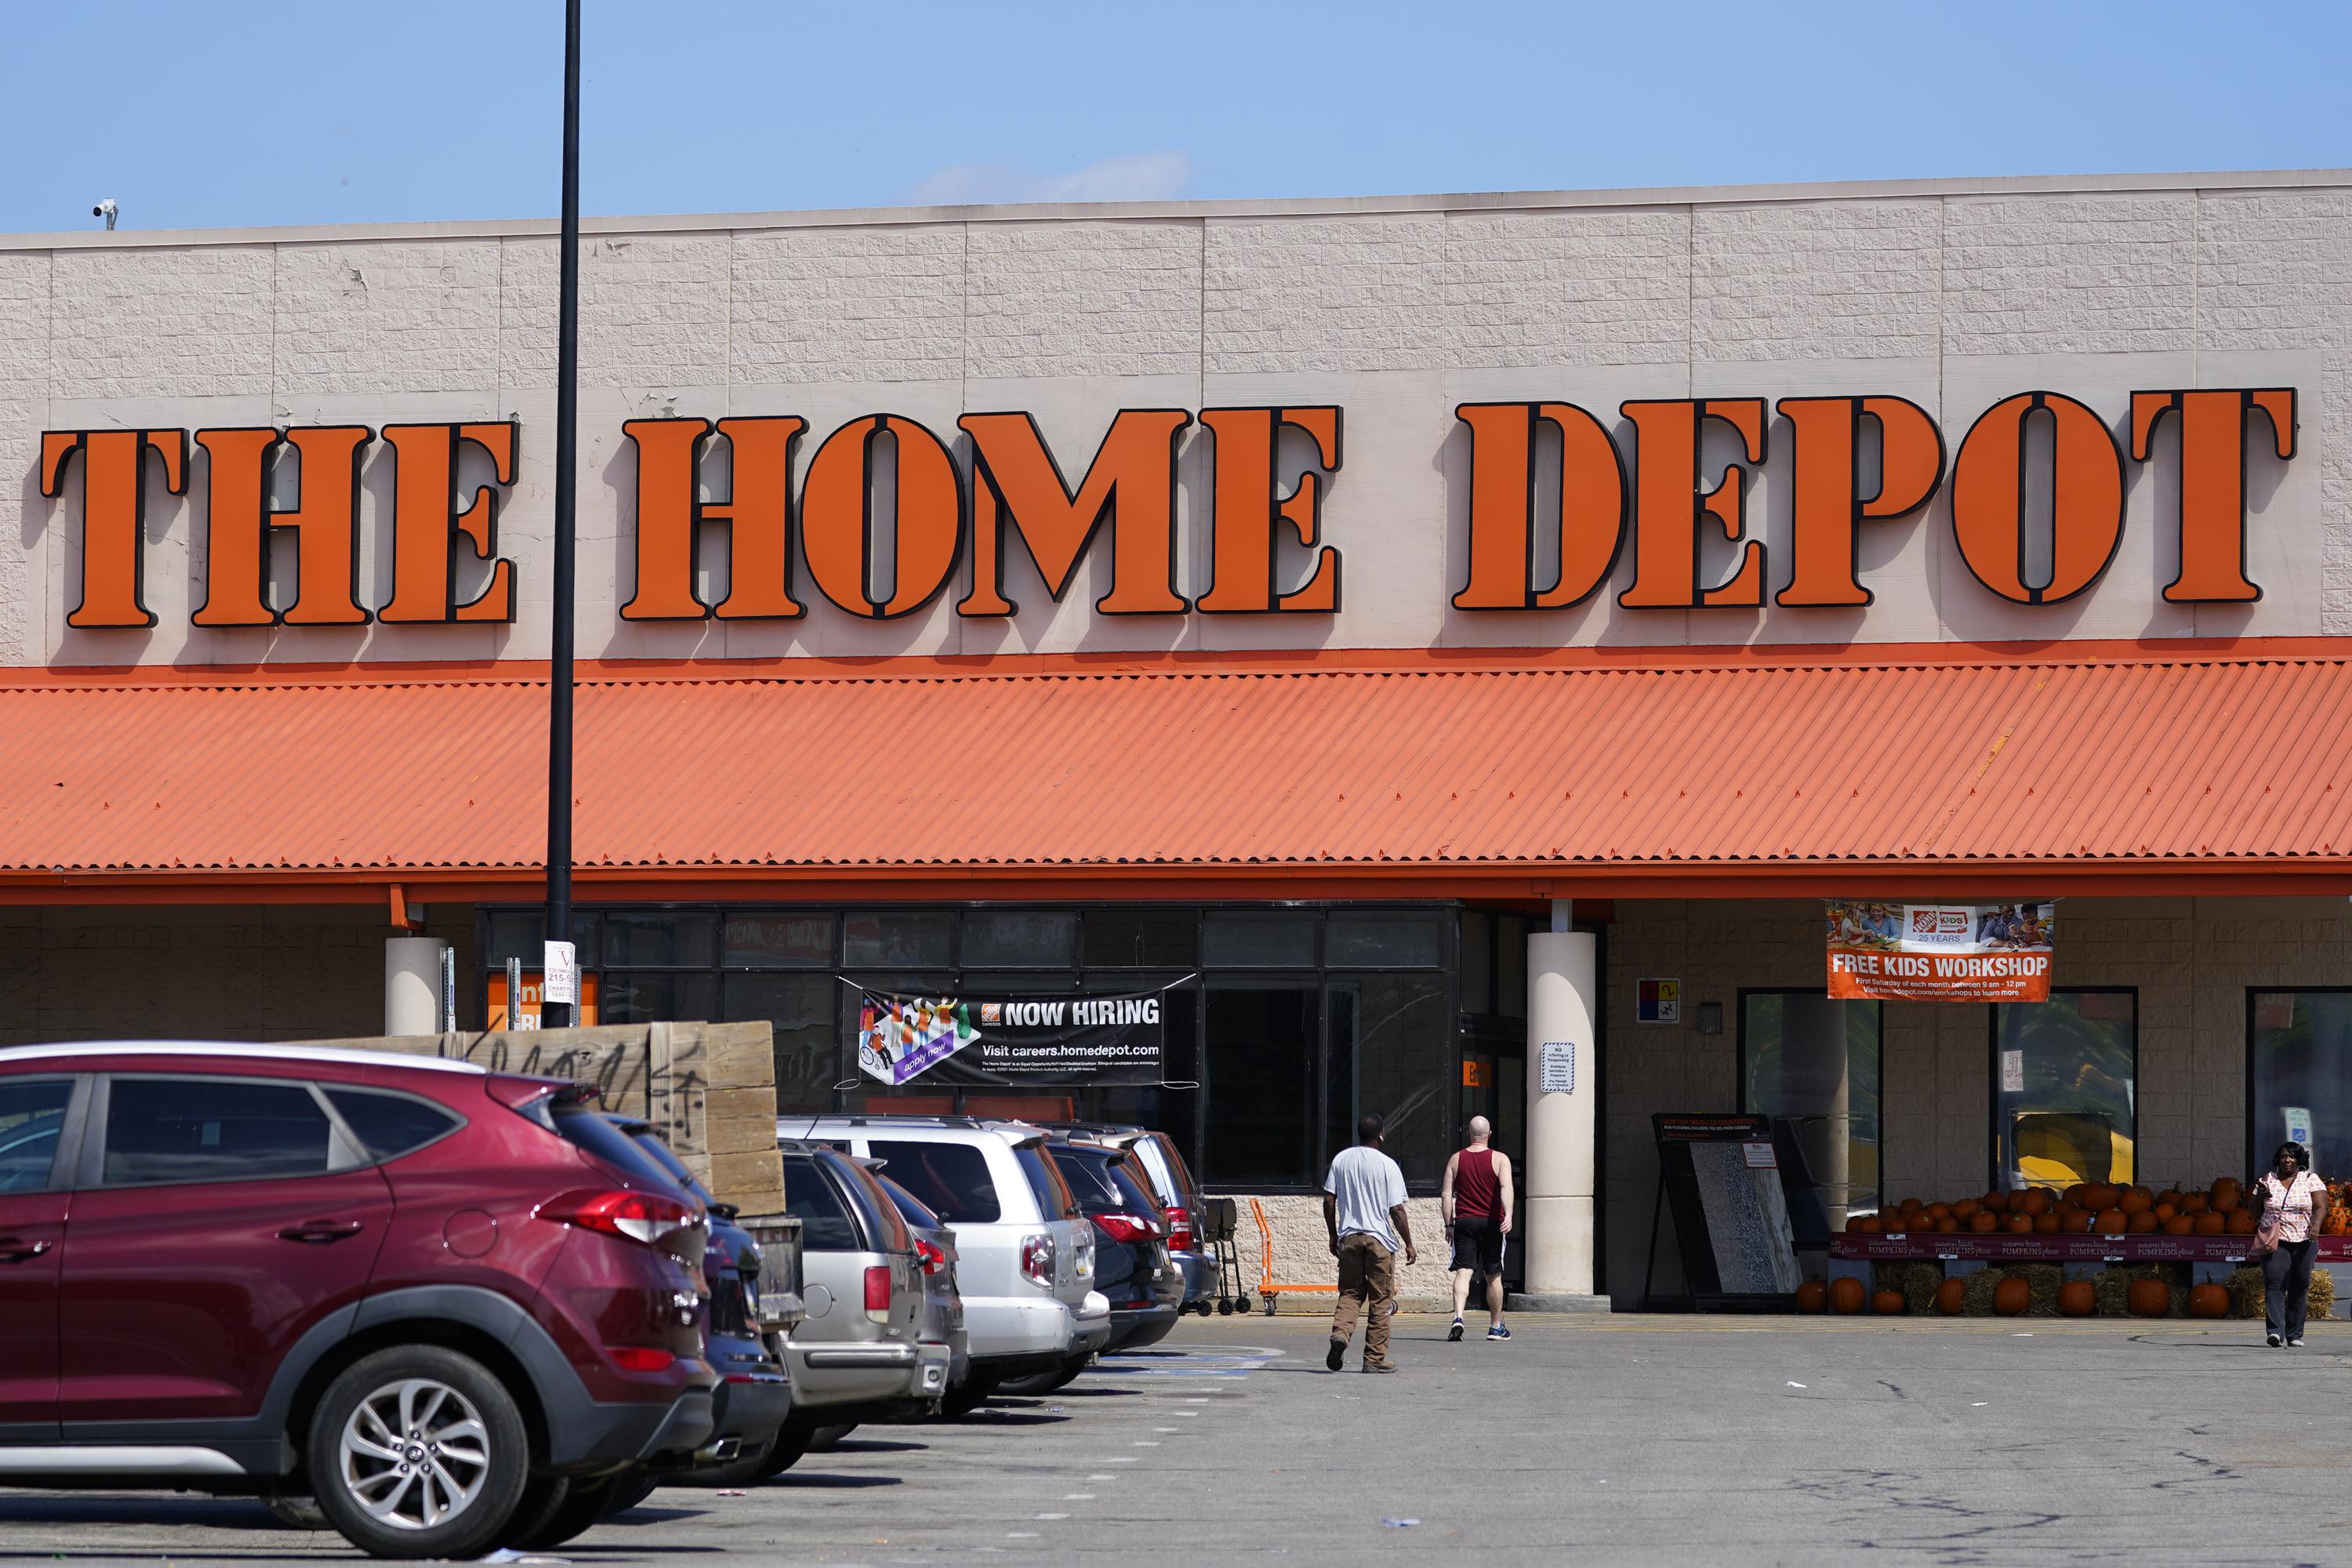 Home Depot sees first annual sales decline in more than a decade